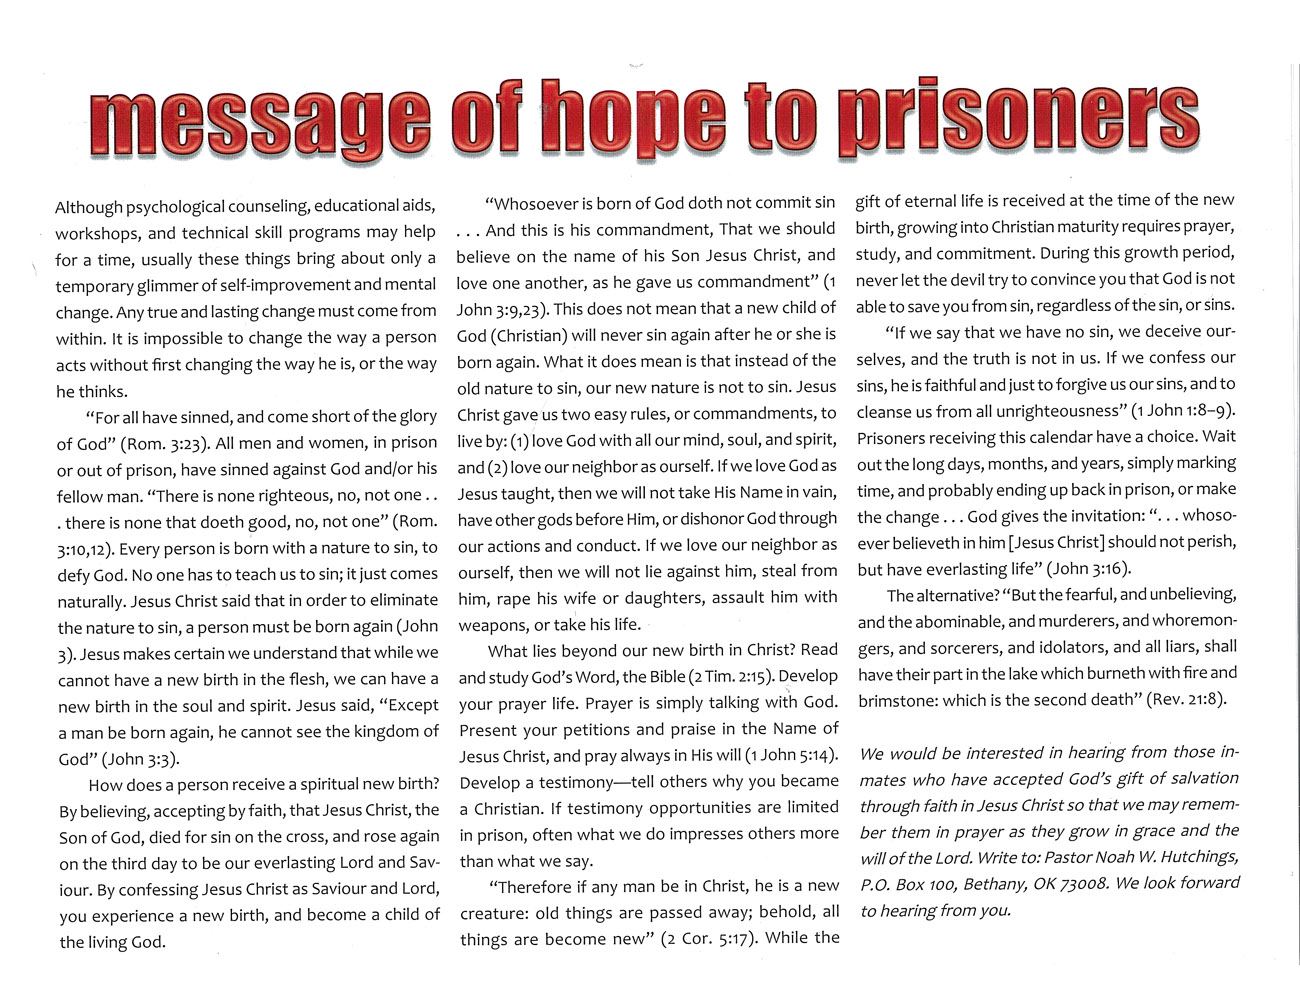 2009 Prophecy Calendar: message of hope to prisoners